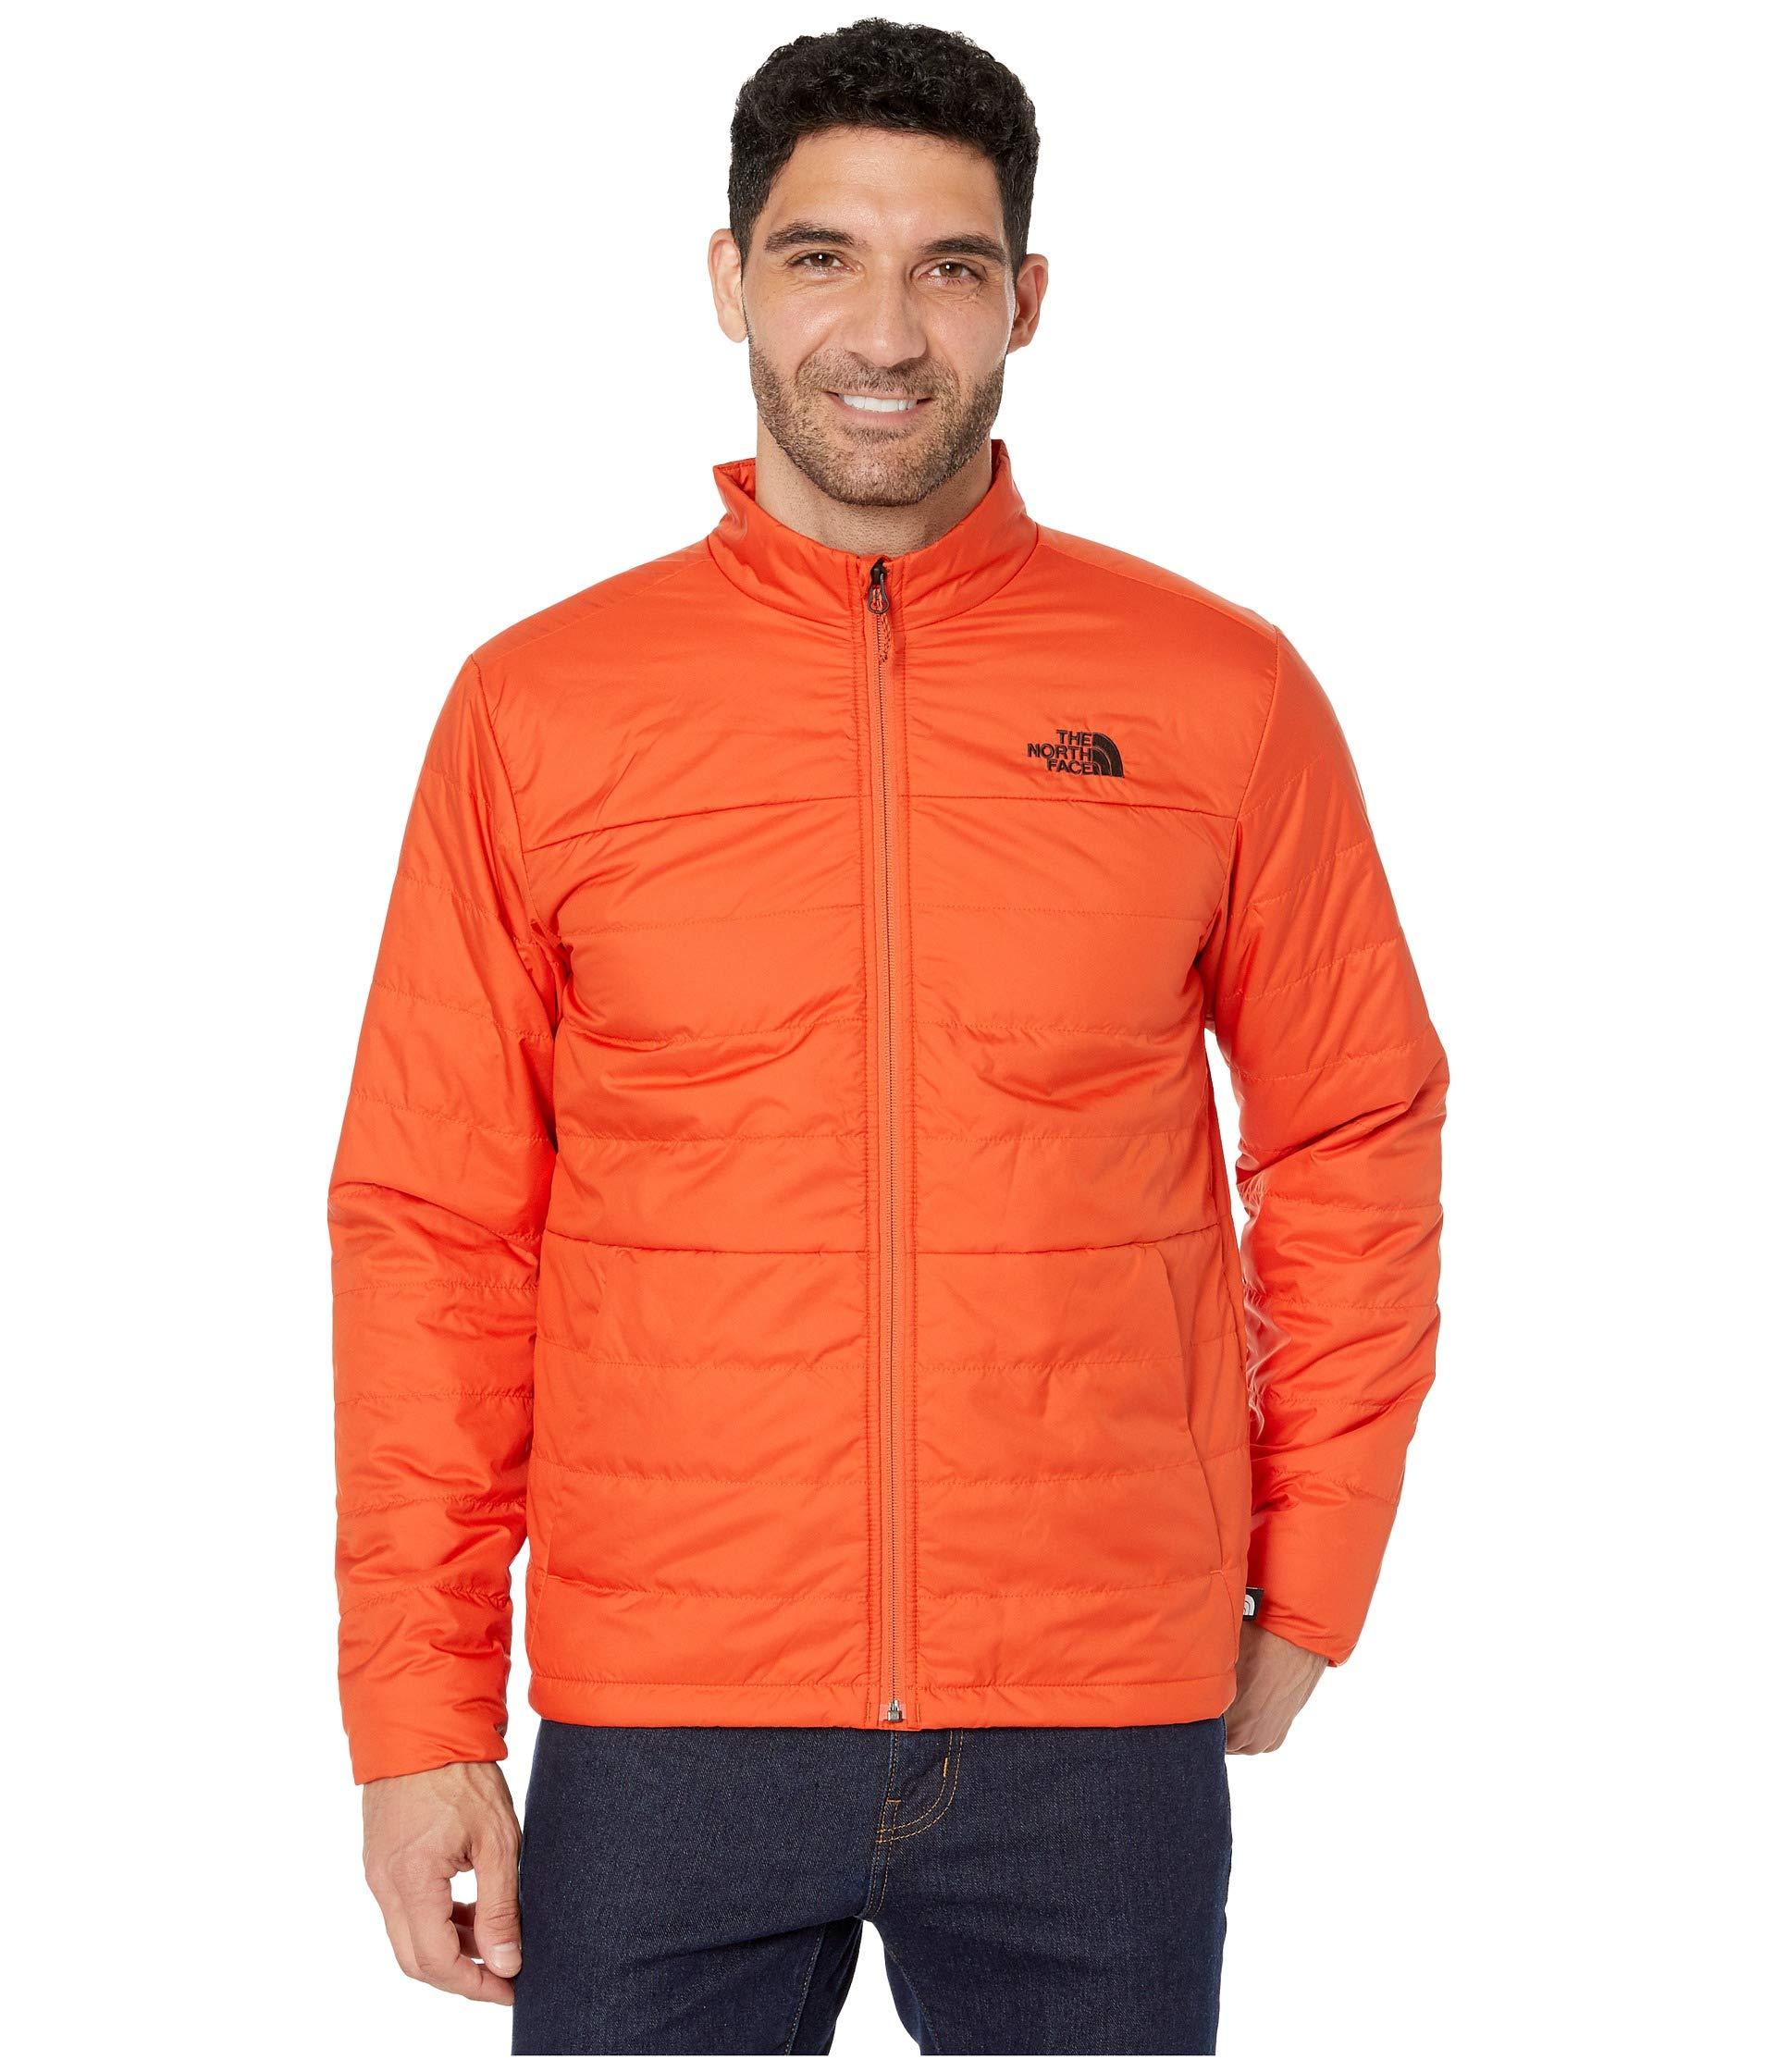 The North Face Synthetic Bombay Jacket in Orange for Men - Lyst